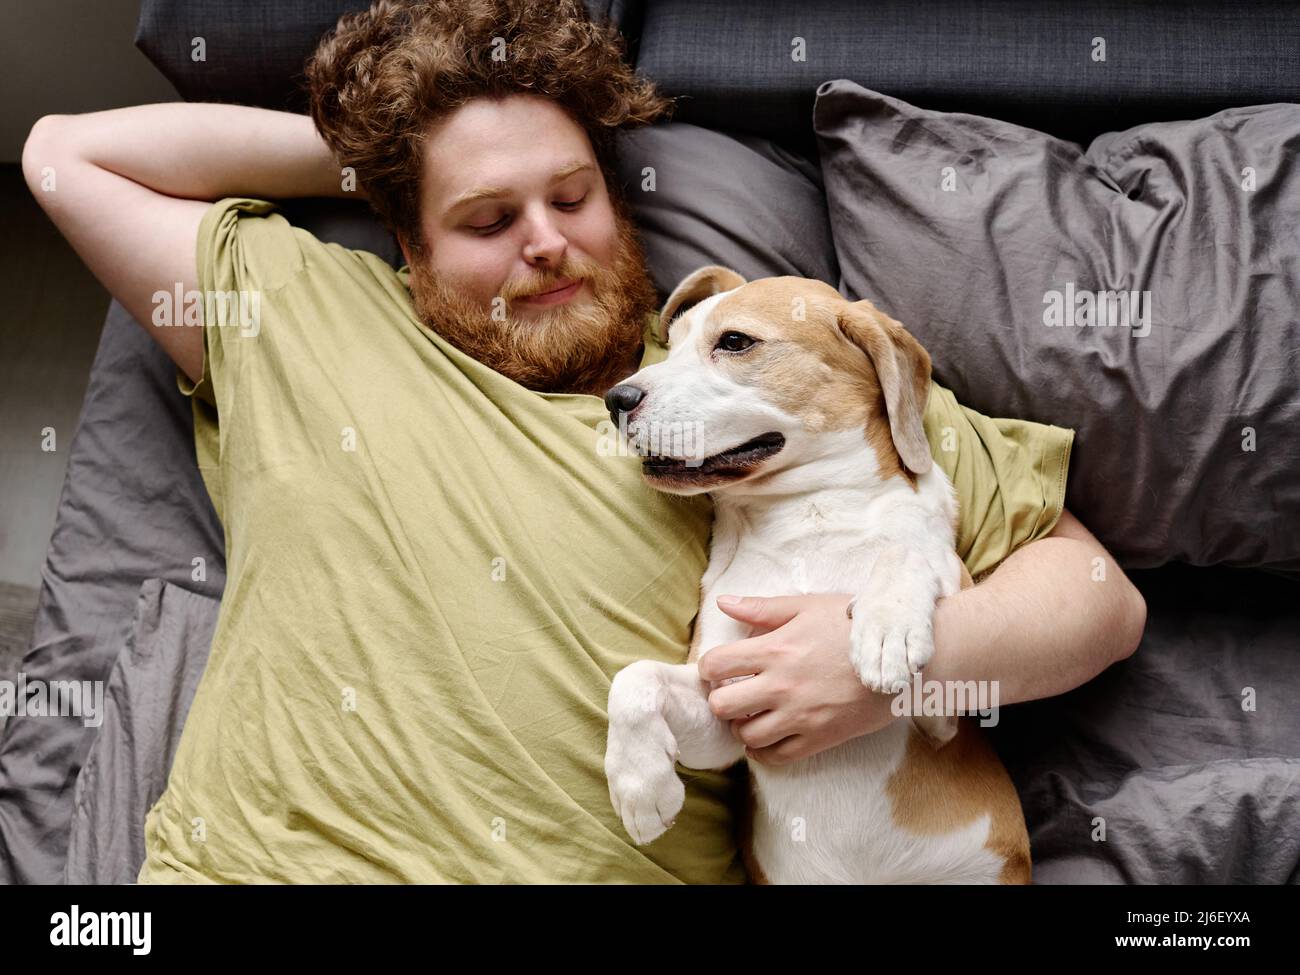 High angle view of young bearded guy relaxing on bed in bedroom embracing his dog Stock Photo